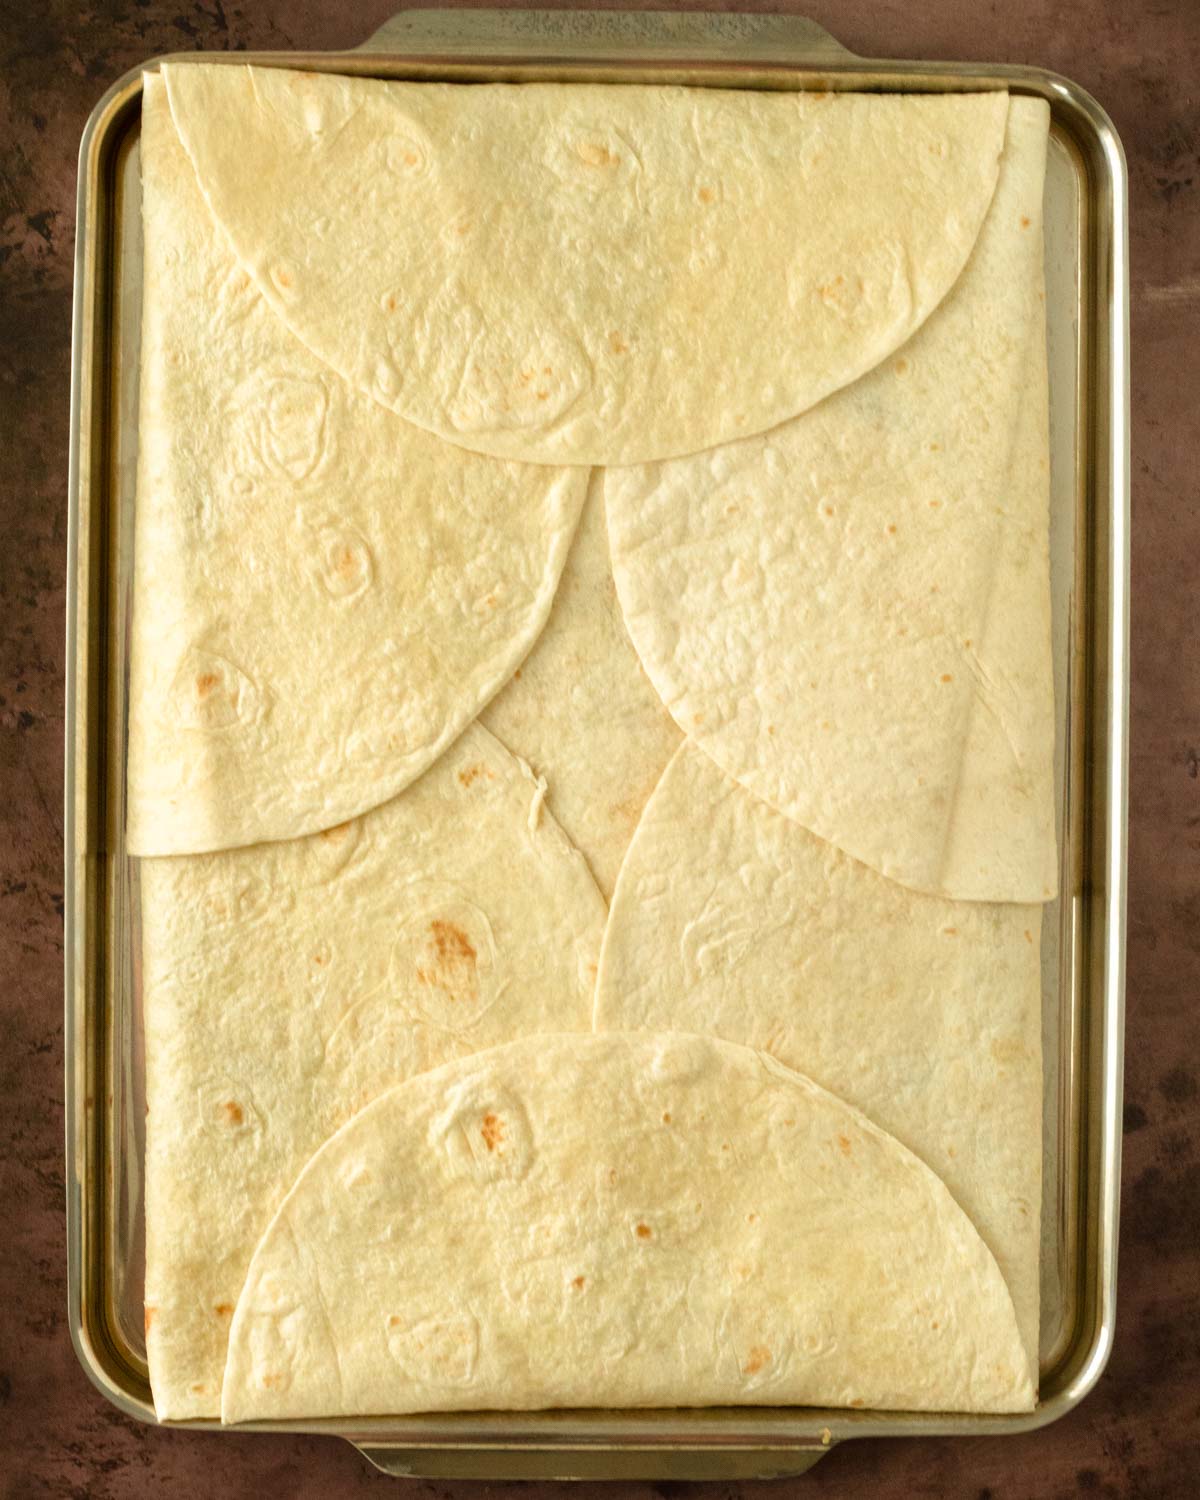 Step 7. Fold the tortillas up